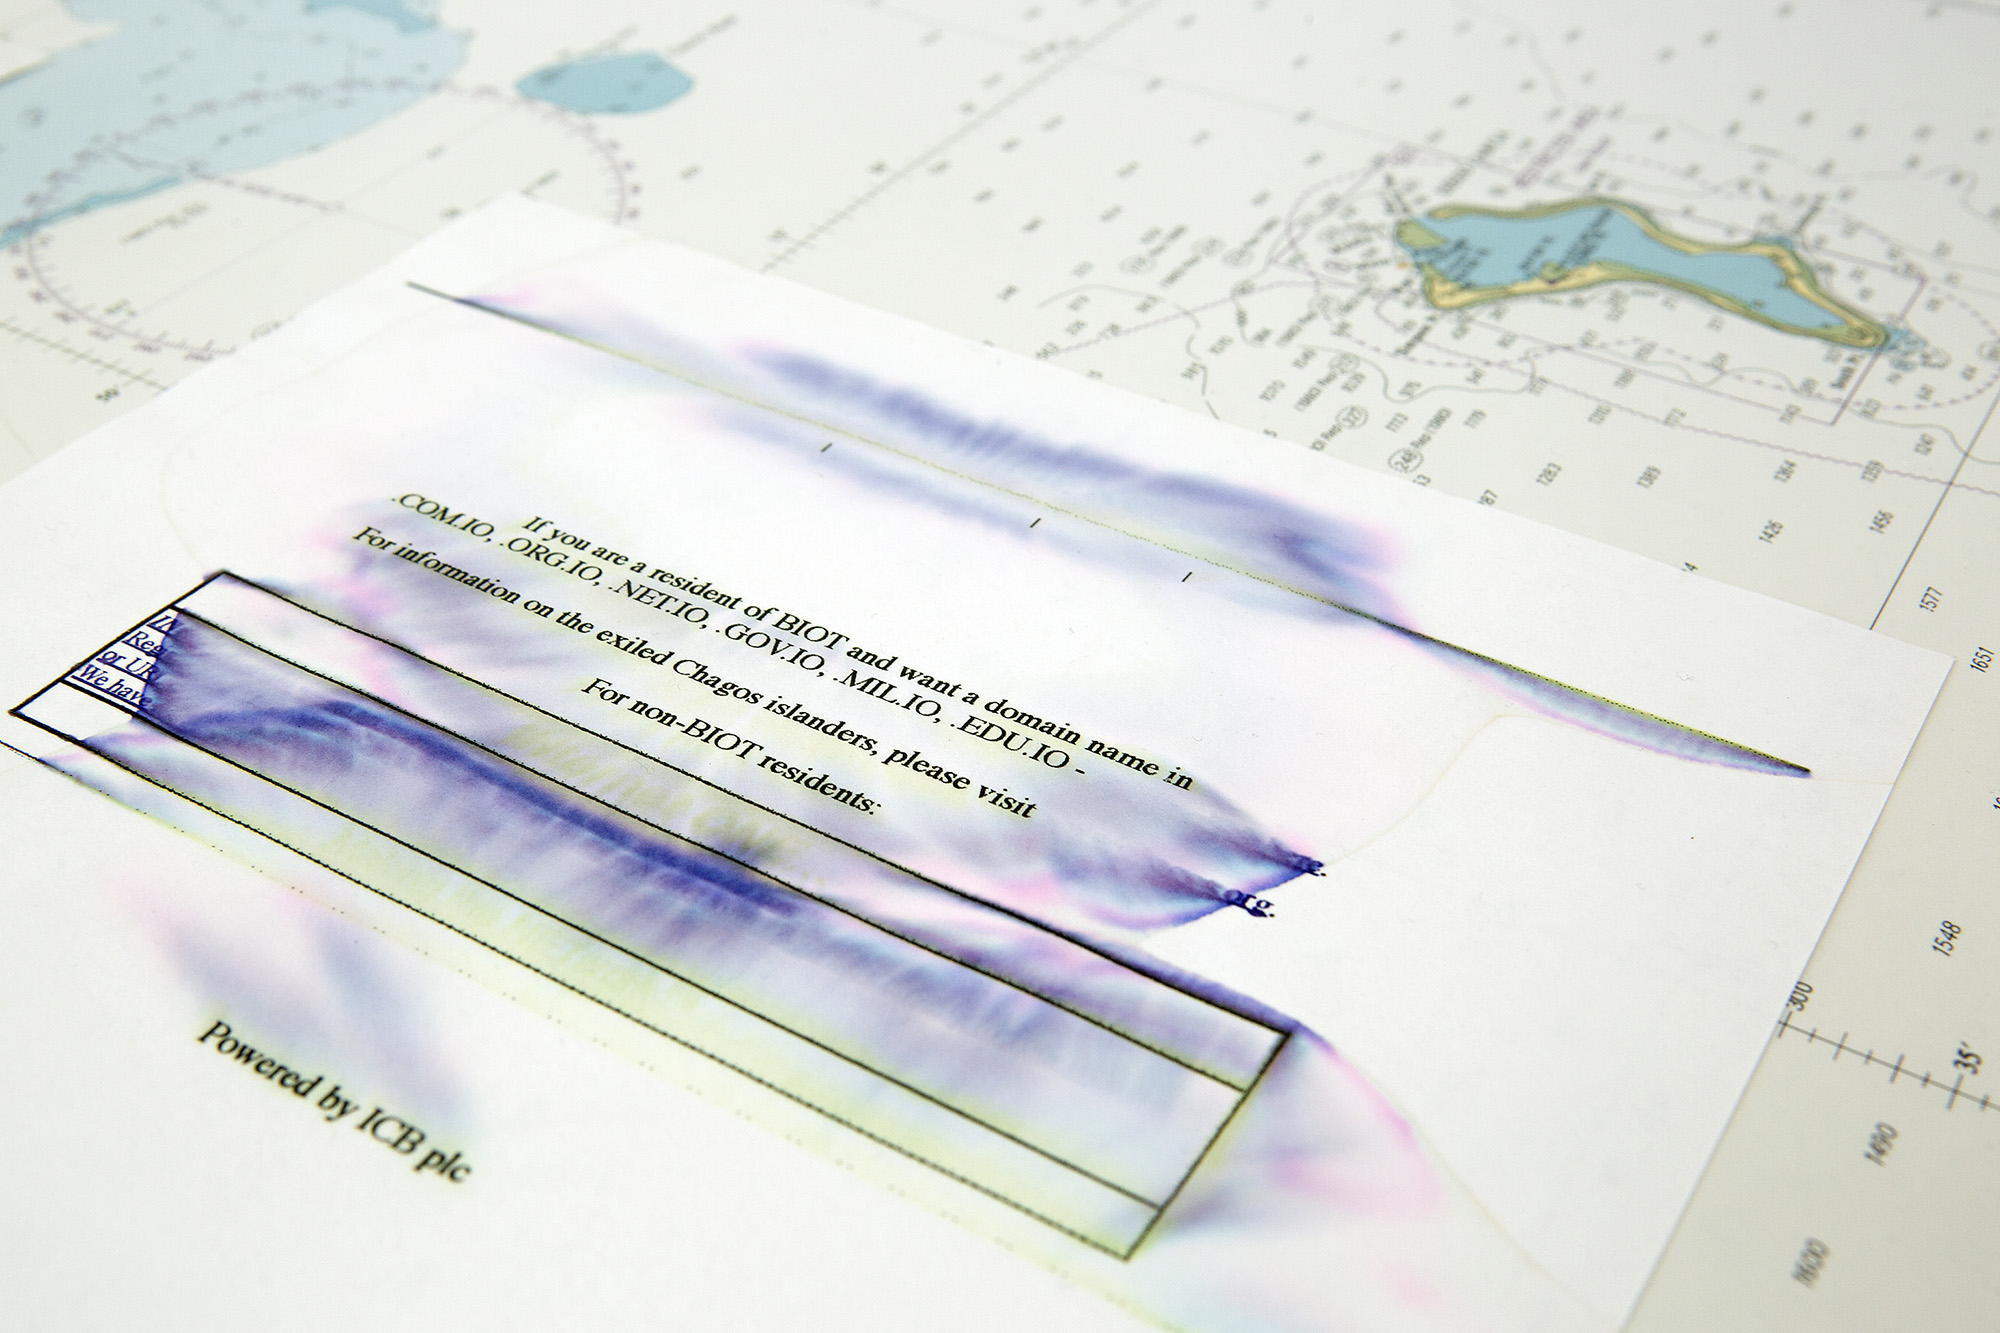 James Bridle, Chagos (Waterboarded Documents 002), 2012 (Detail)